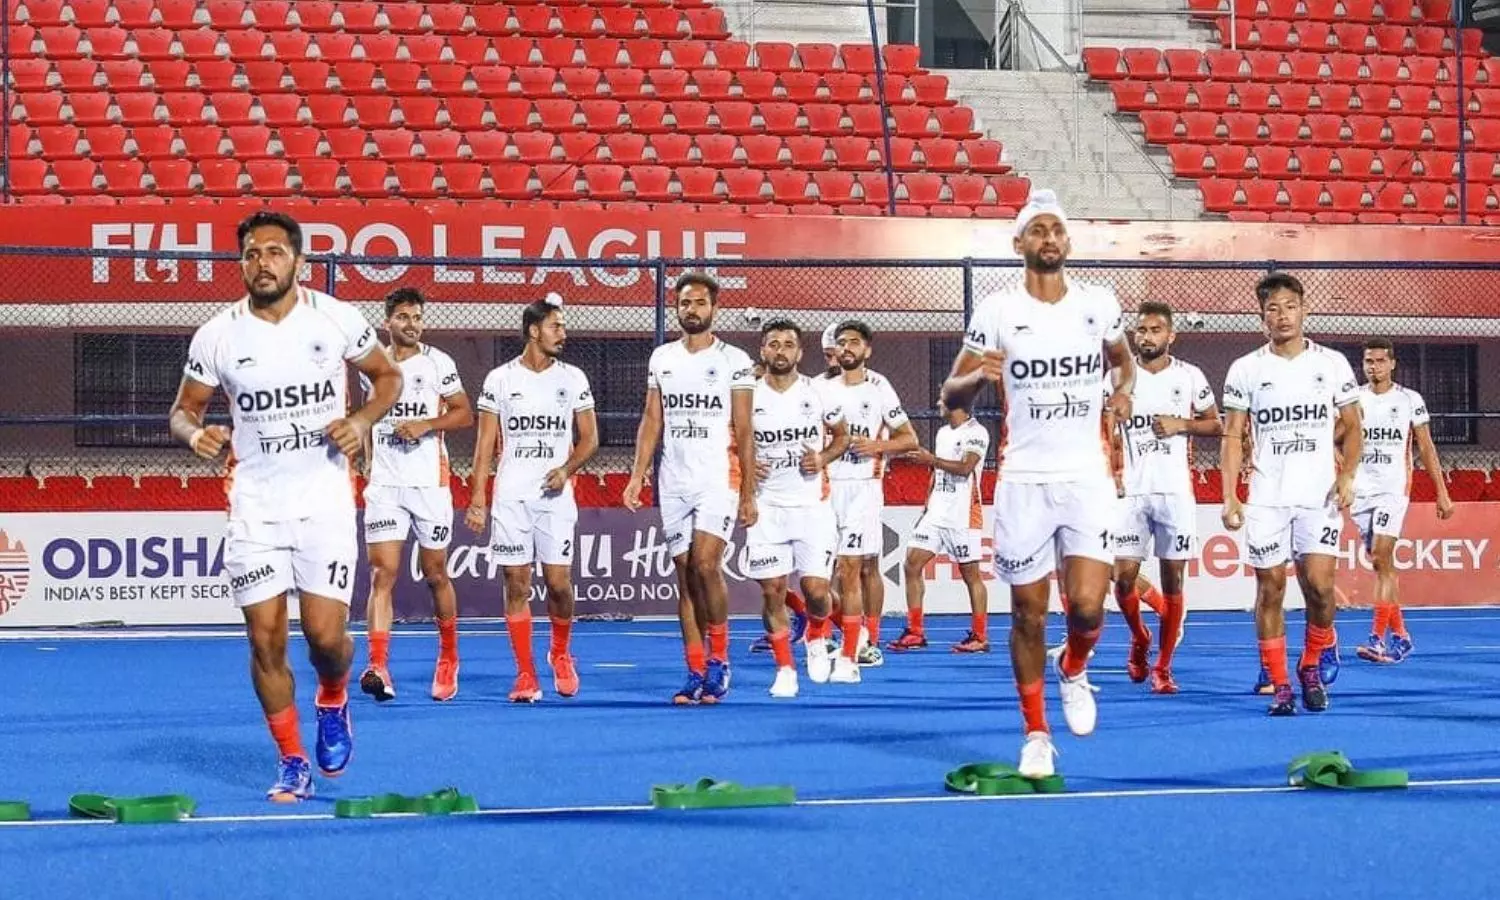 FIH Hockey Pro League 2022 India Squad, Full Schedule, Where to Watch, Live Stream